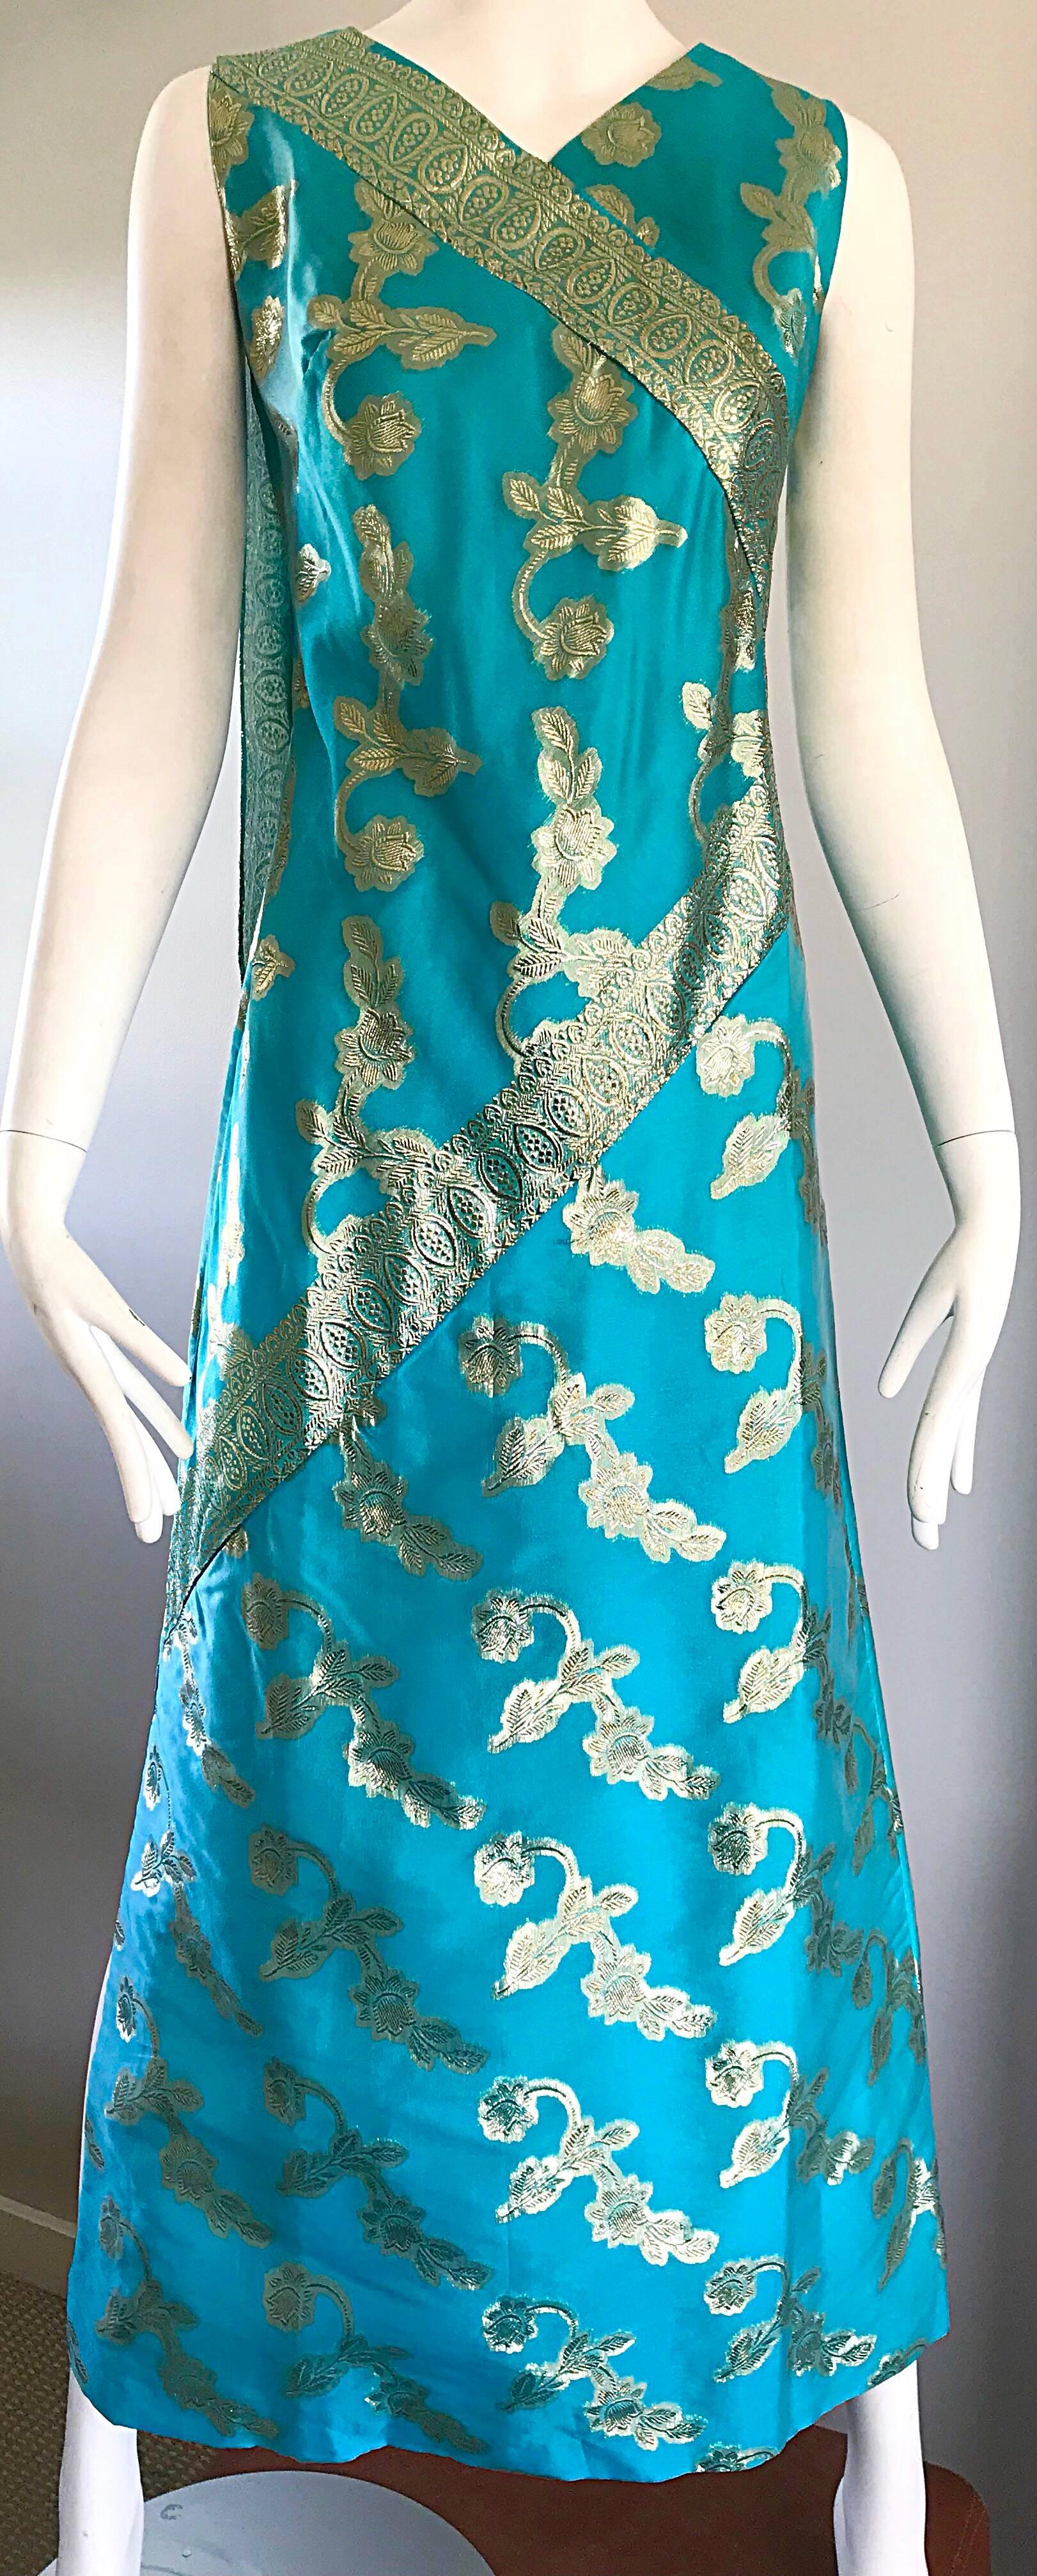 1960s Waltah Clarke's Turquoise Blue and Gold Vintage 60s Silk Maxi Dress In Excellent Condition For Sale In San Diego, CA